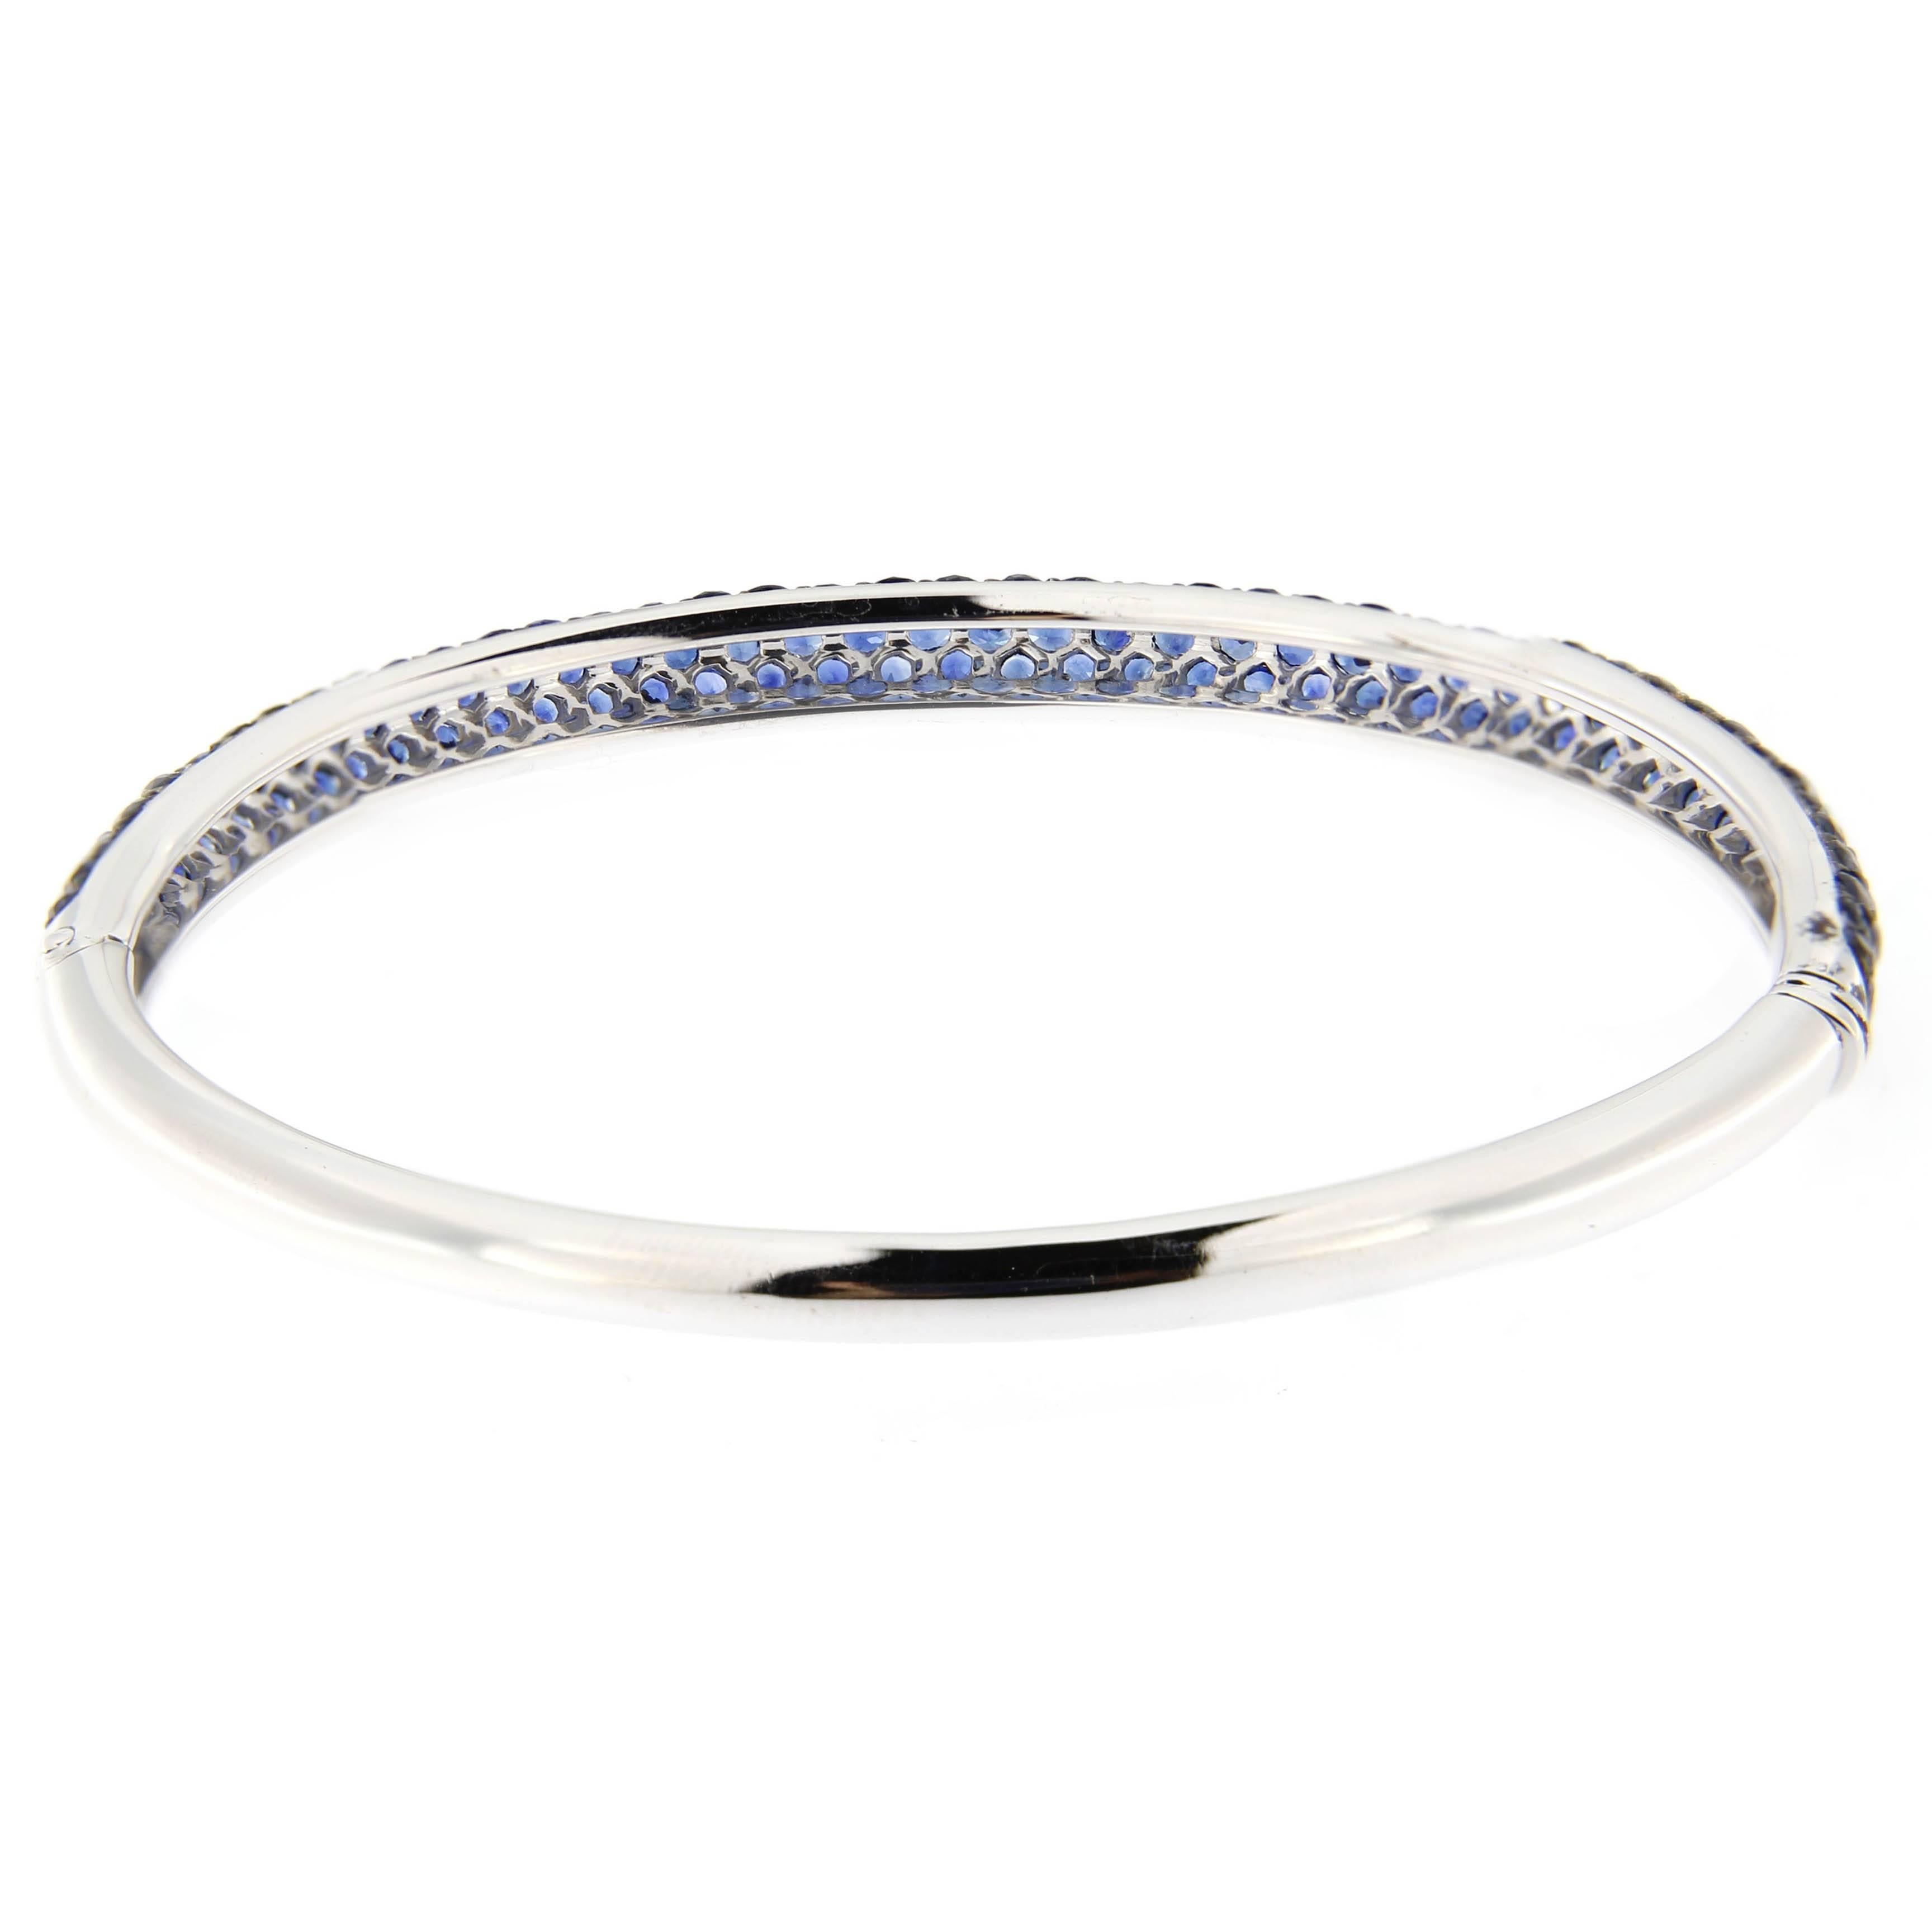 Jona design collection, hand crafted in Italy, 18 karat white gold bangle bracelet. The sapphire pavé is set with 103 burmese blue sapphires for a total weight of 5.34 carats.
All Jona jewelry is new and has never been previously owned or worn.